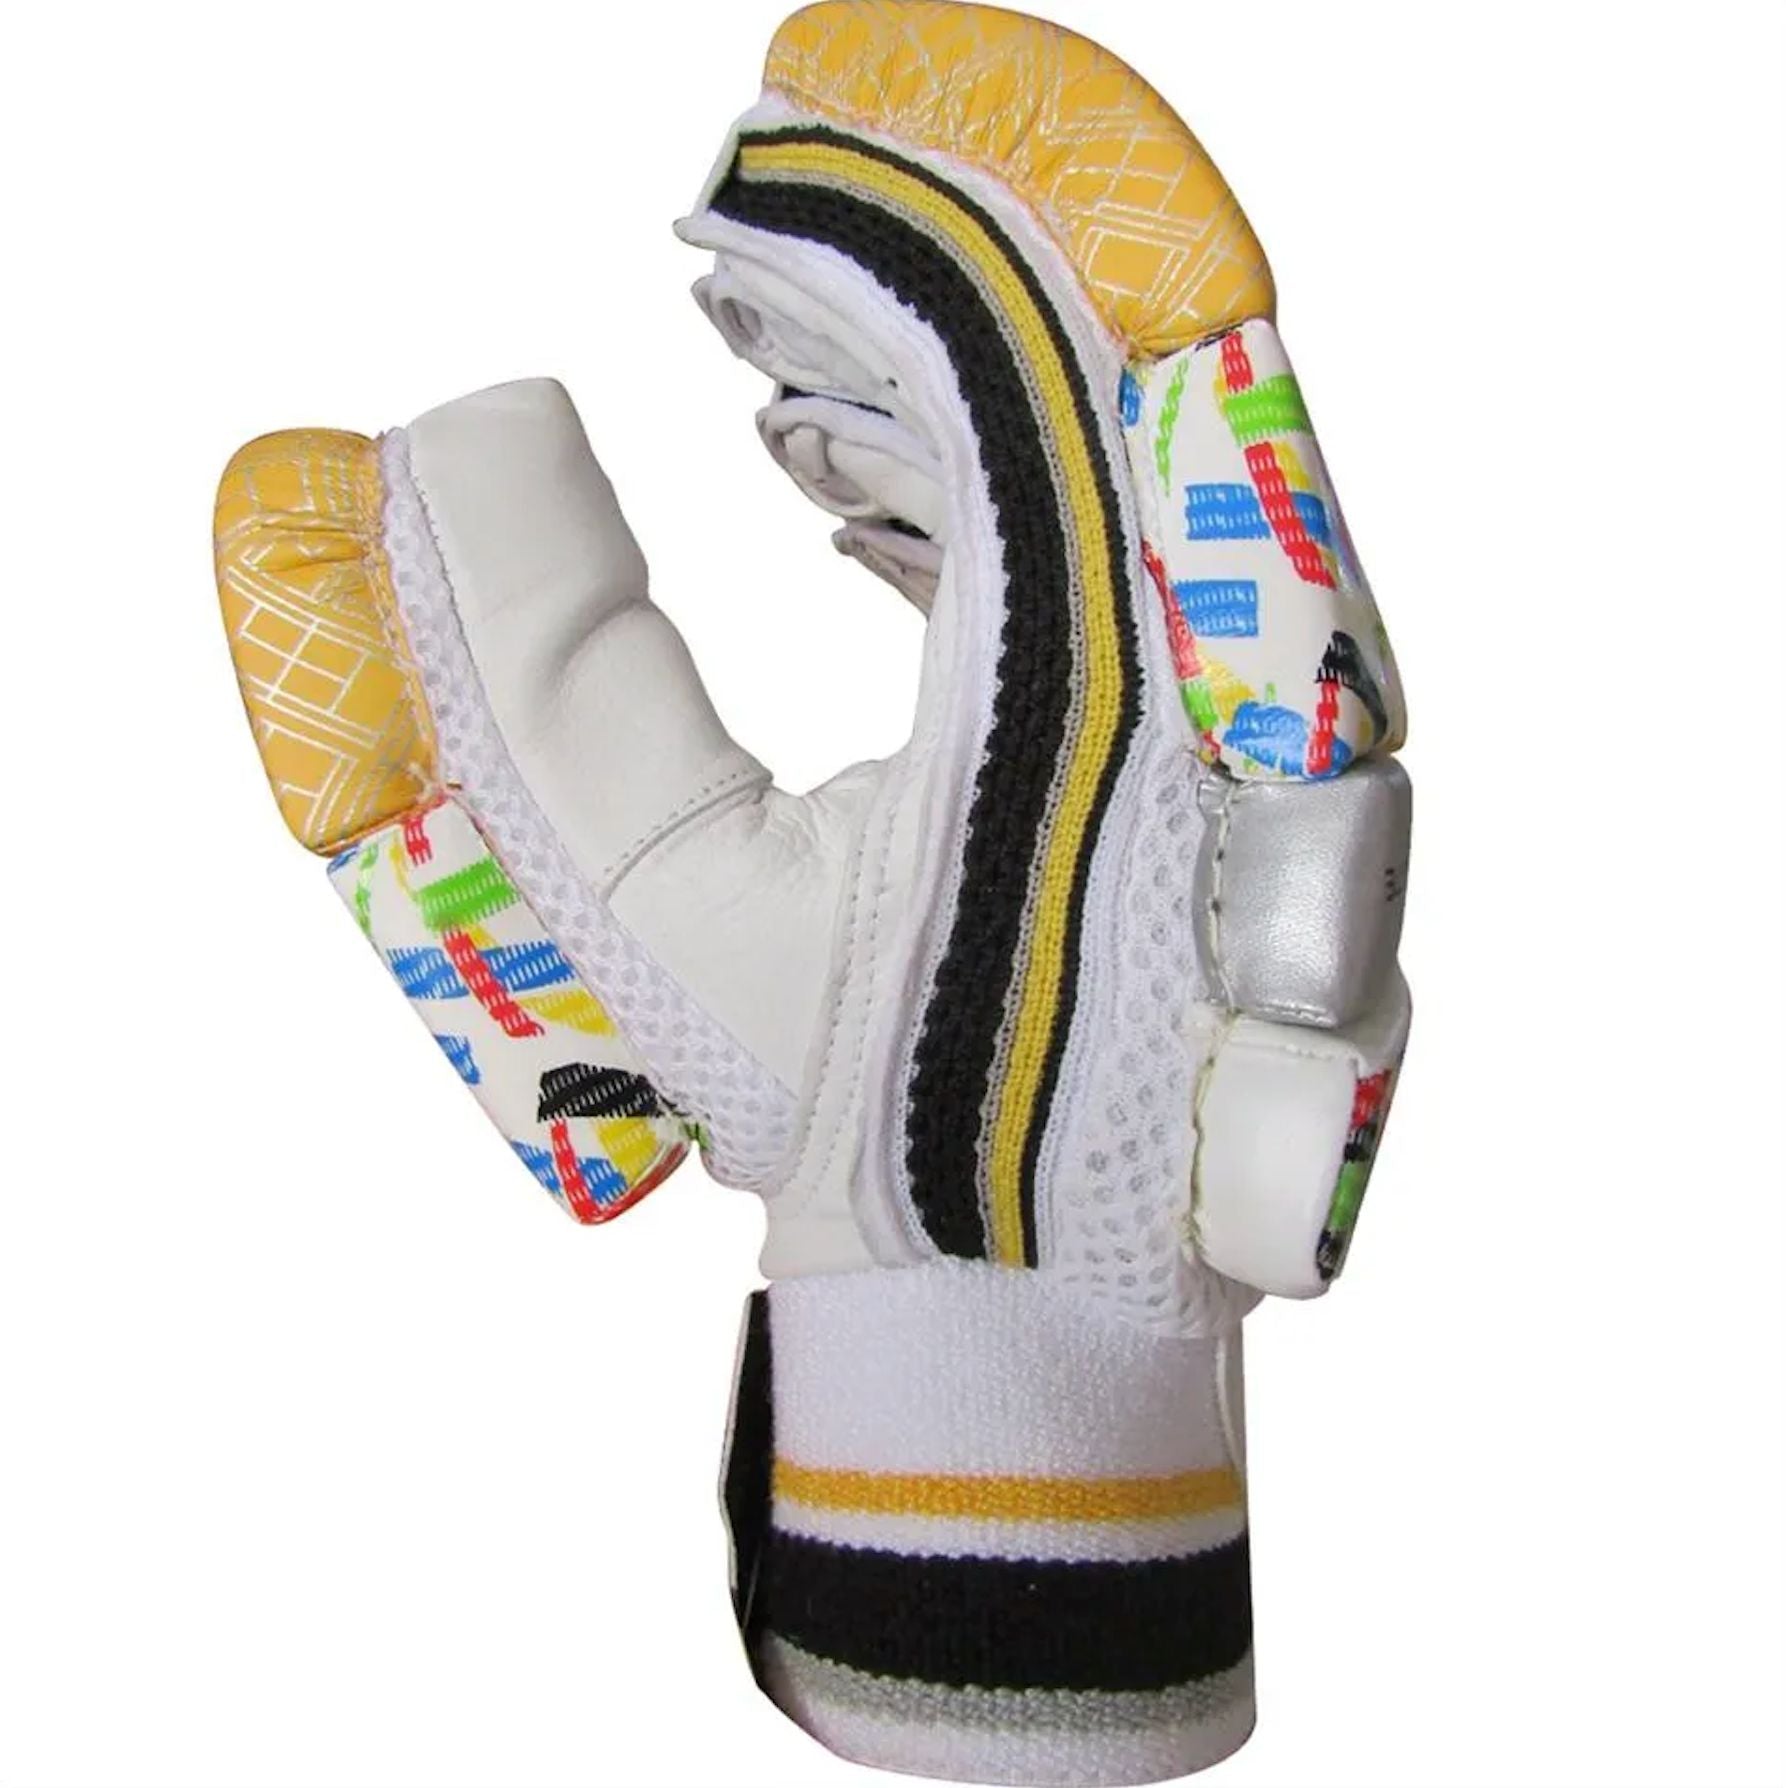 SS Clublite Junior Cricket Batting Gloves for Youth / Boys